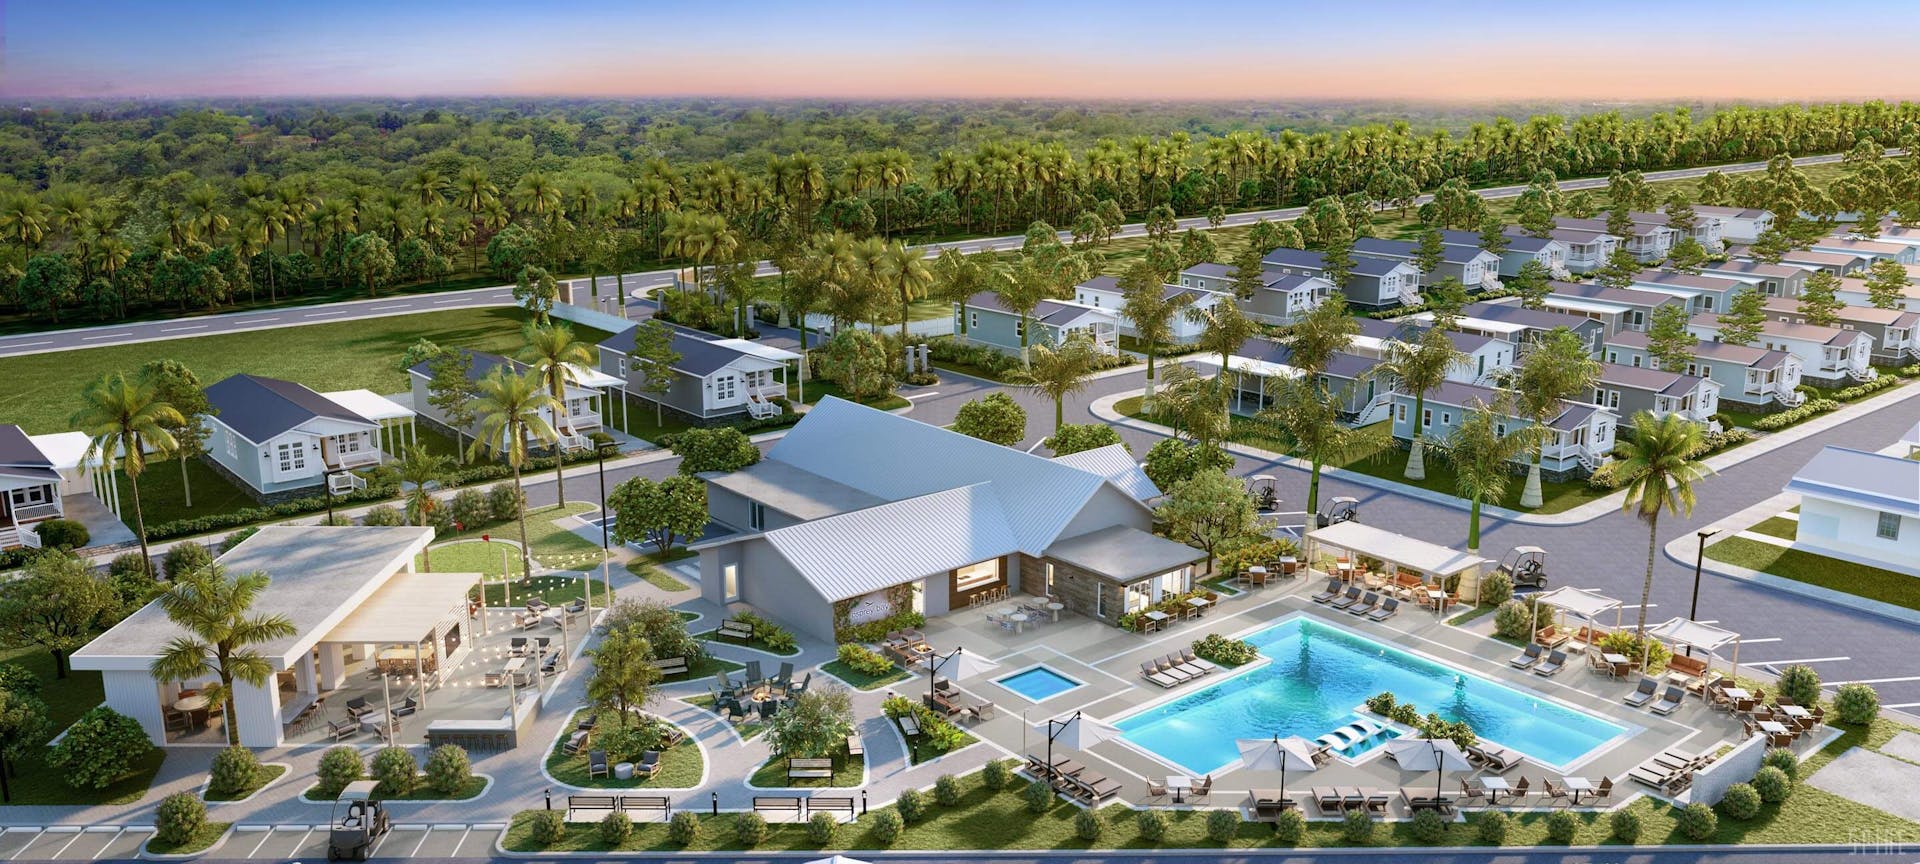 Neighborhood rendering with houses, clubhouse, and pool